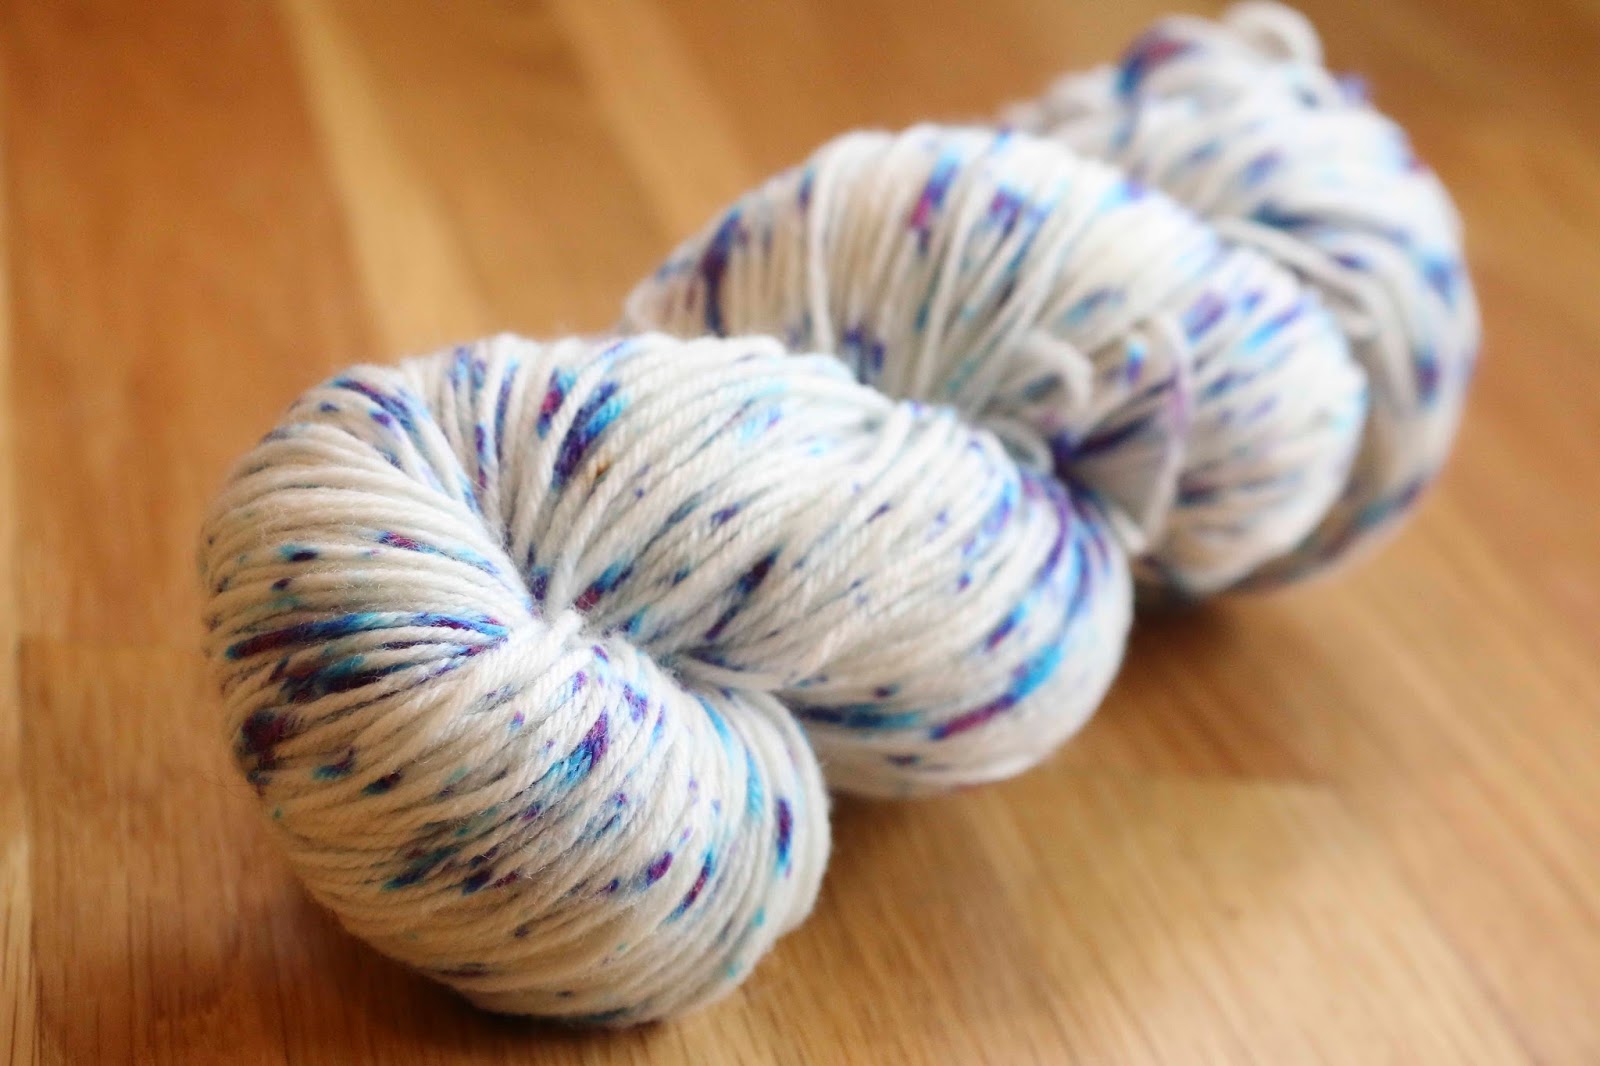 ChemKnits: Dyeing Speckled Yarn with Wilton's Violet Food Coloring